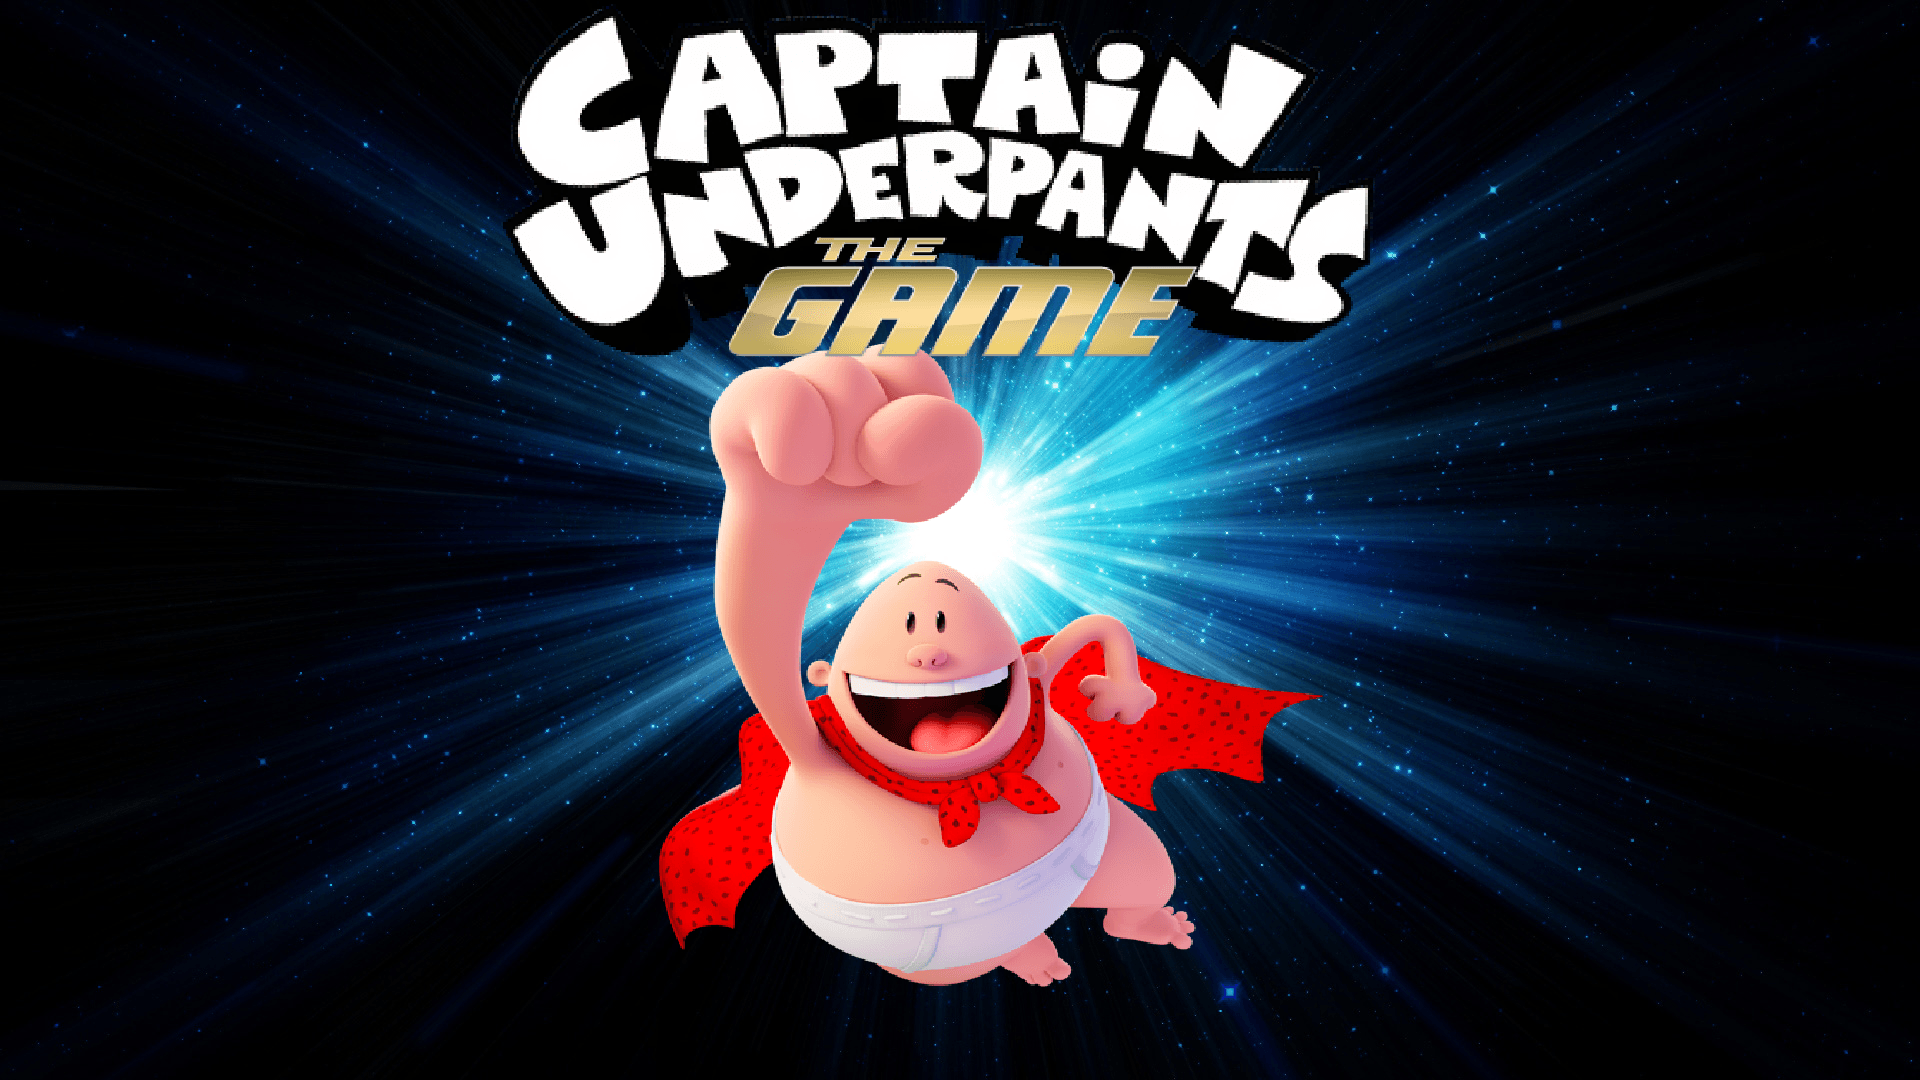 Captain Underpants: The Video Game